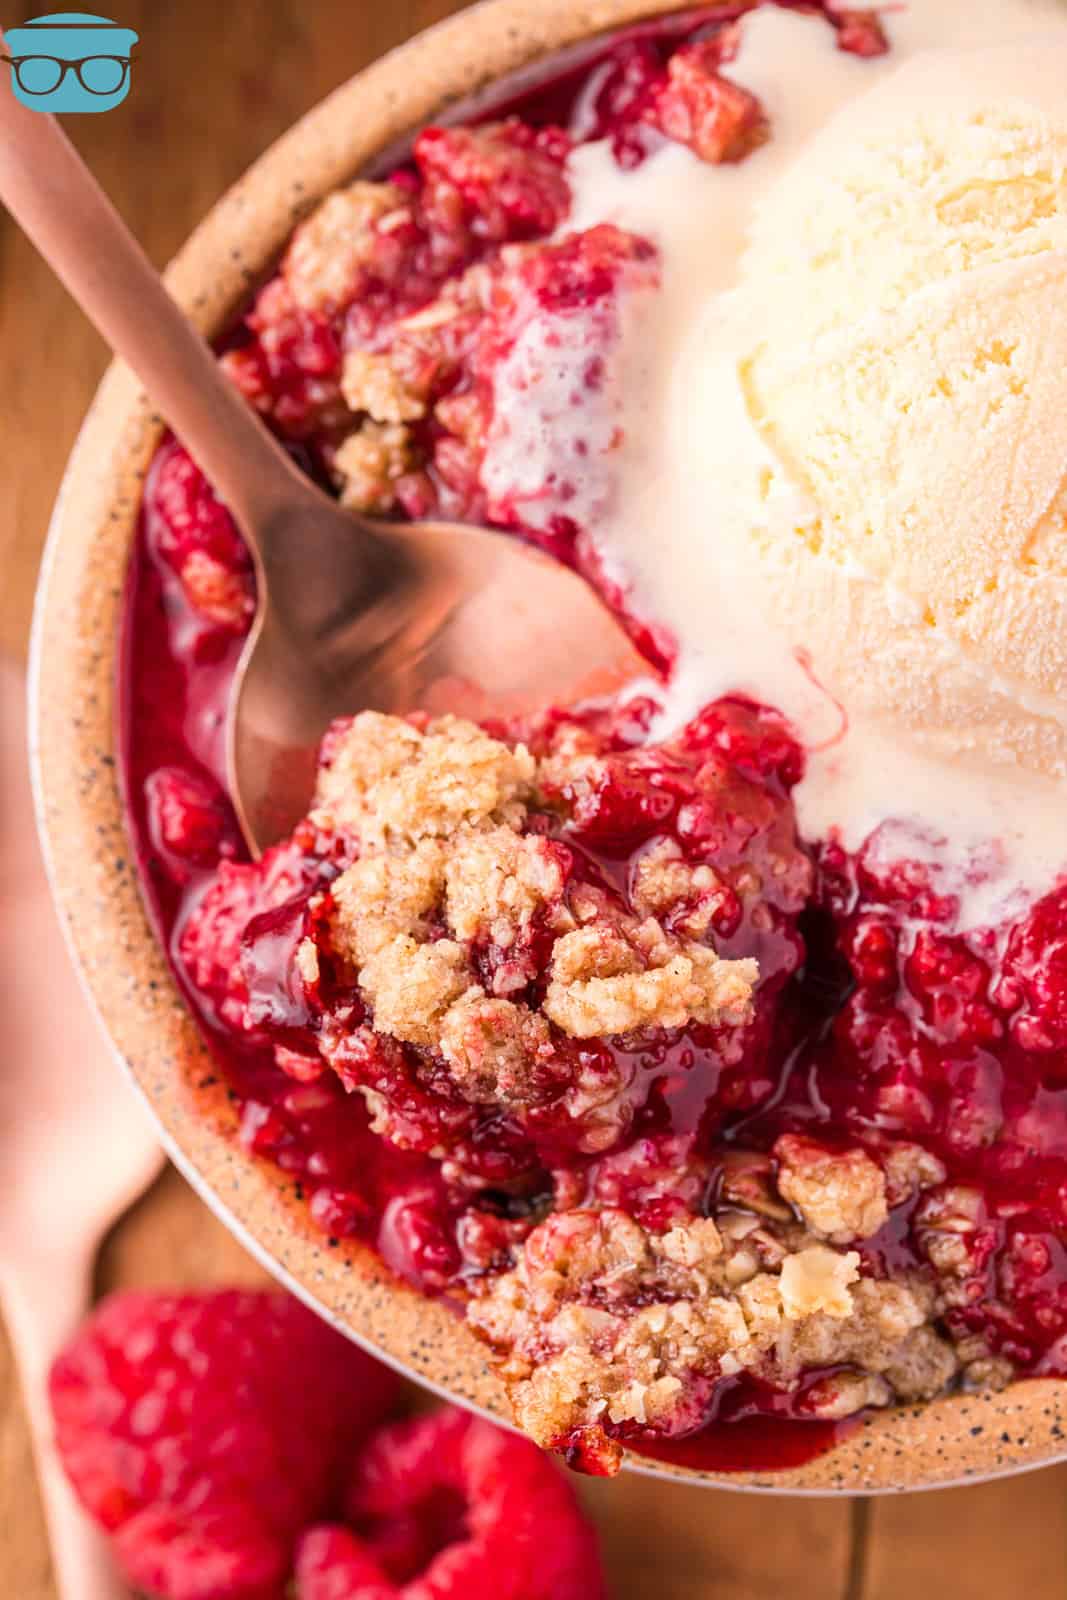 A spoon in a serving of Raspberry Crumble with vanilla ice cream on top.